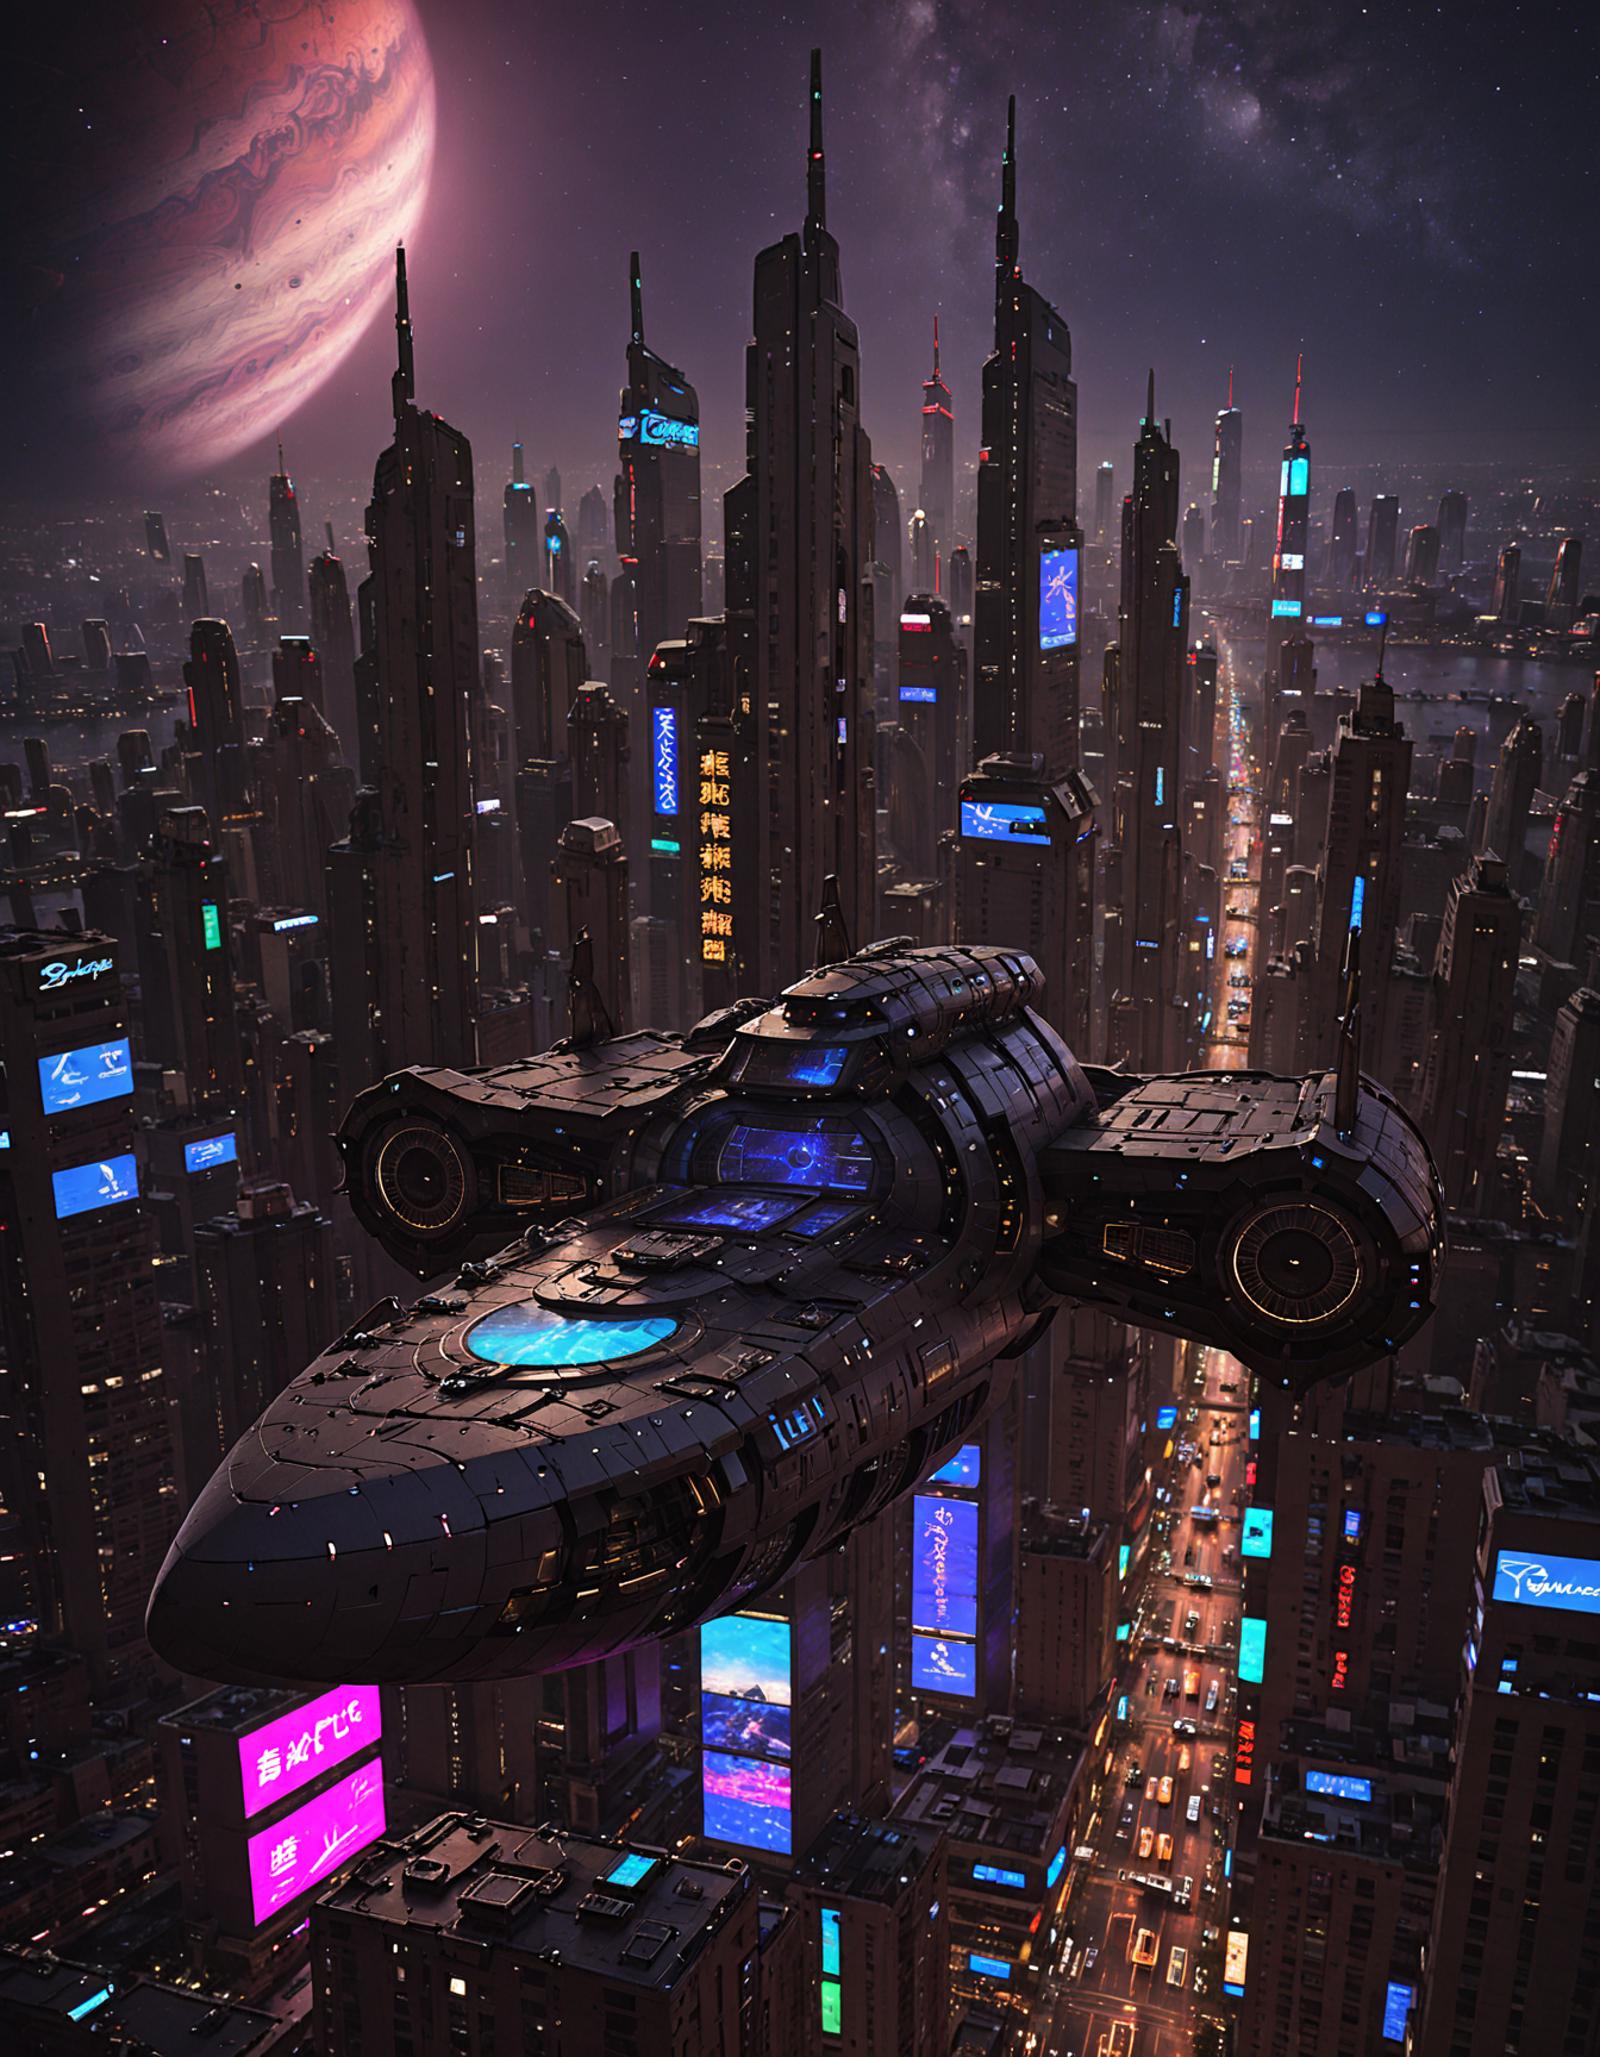 Futuristic city view with a flying spacecraft.